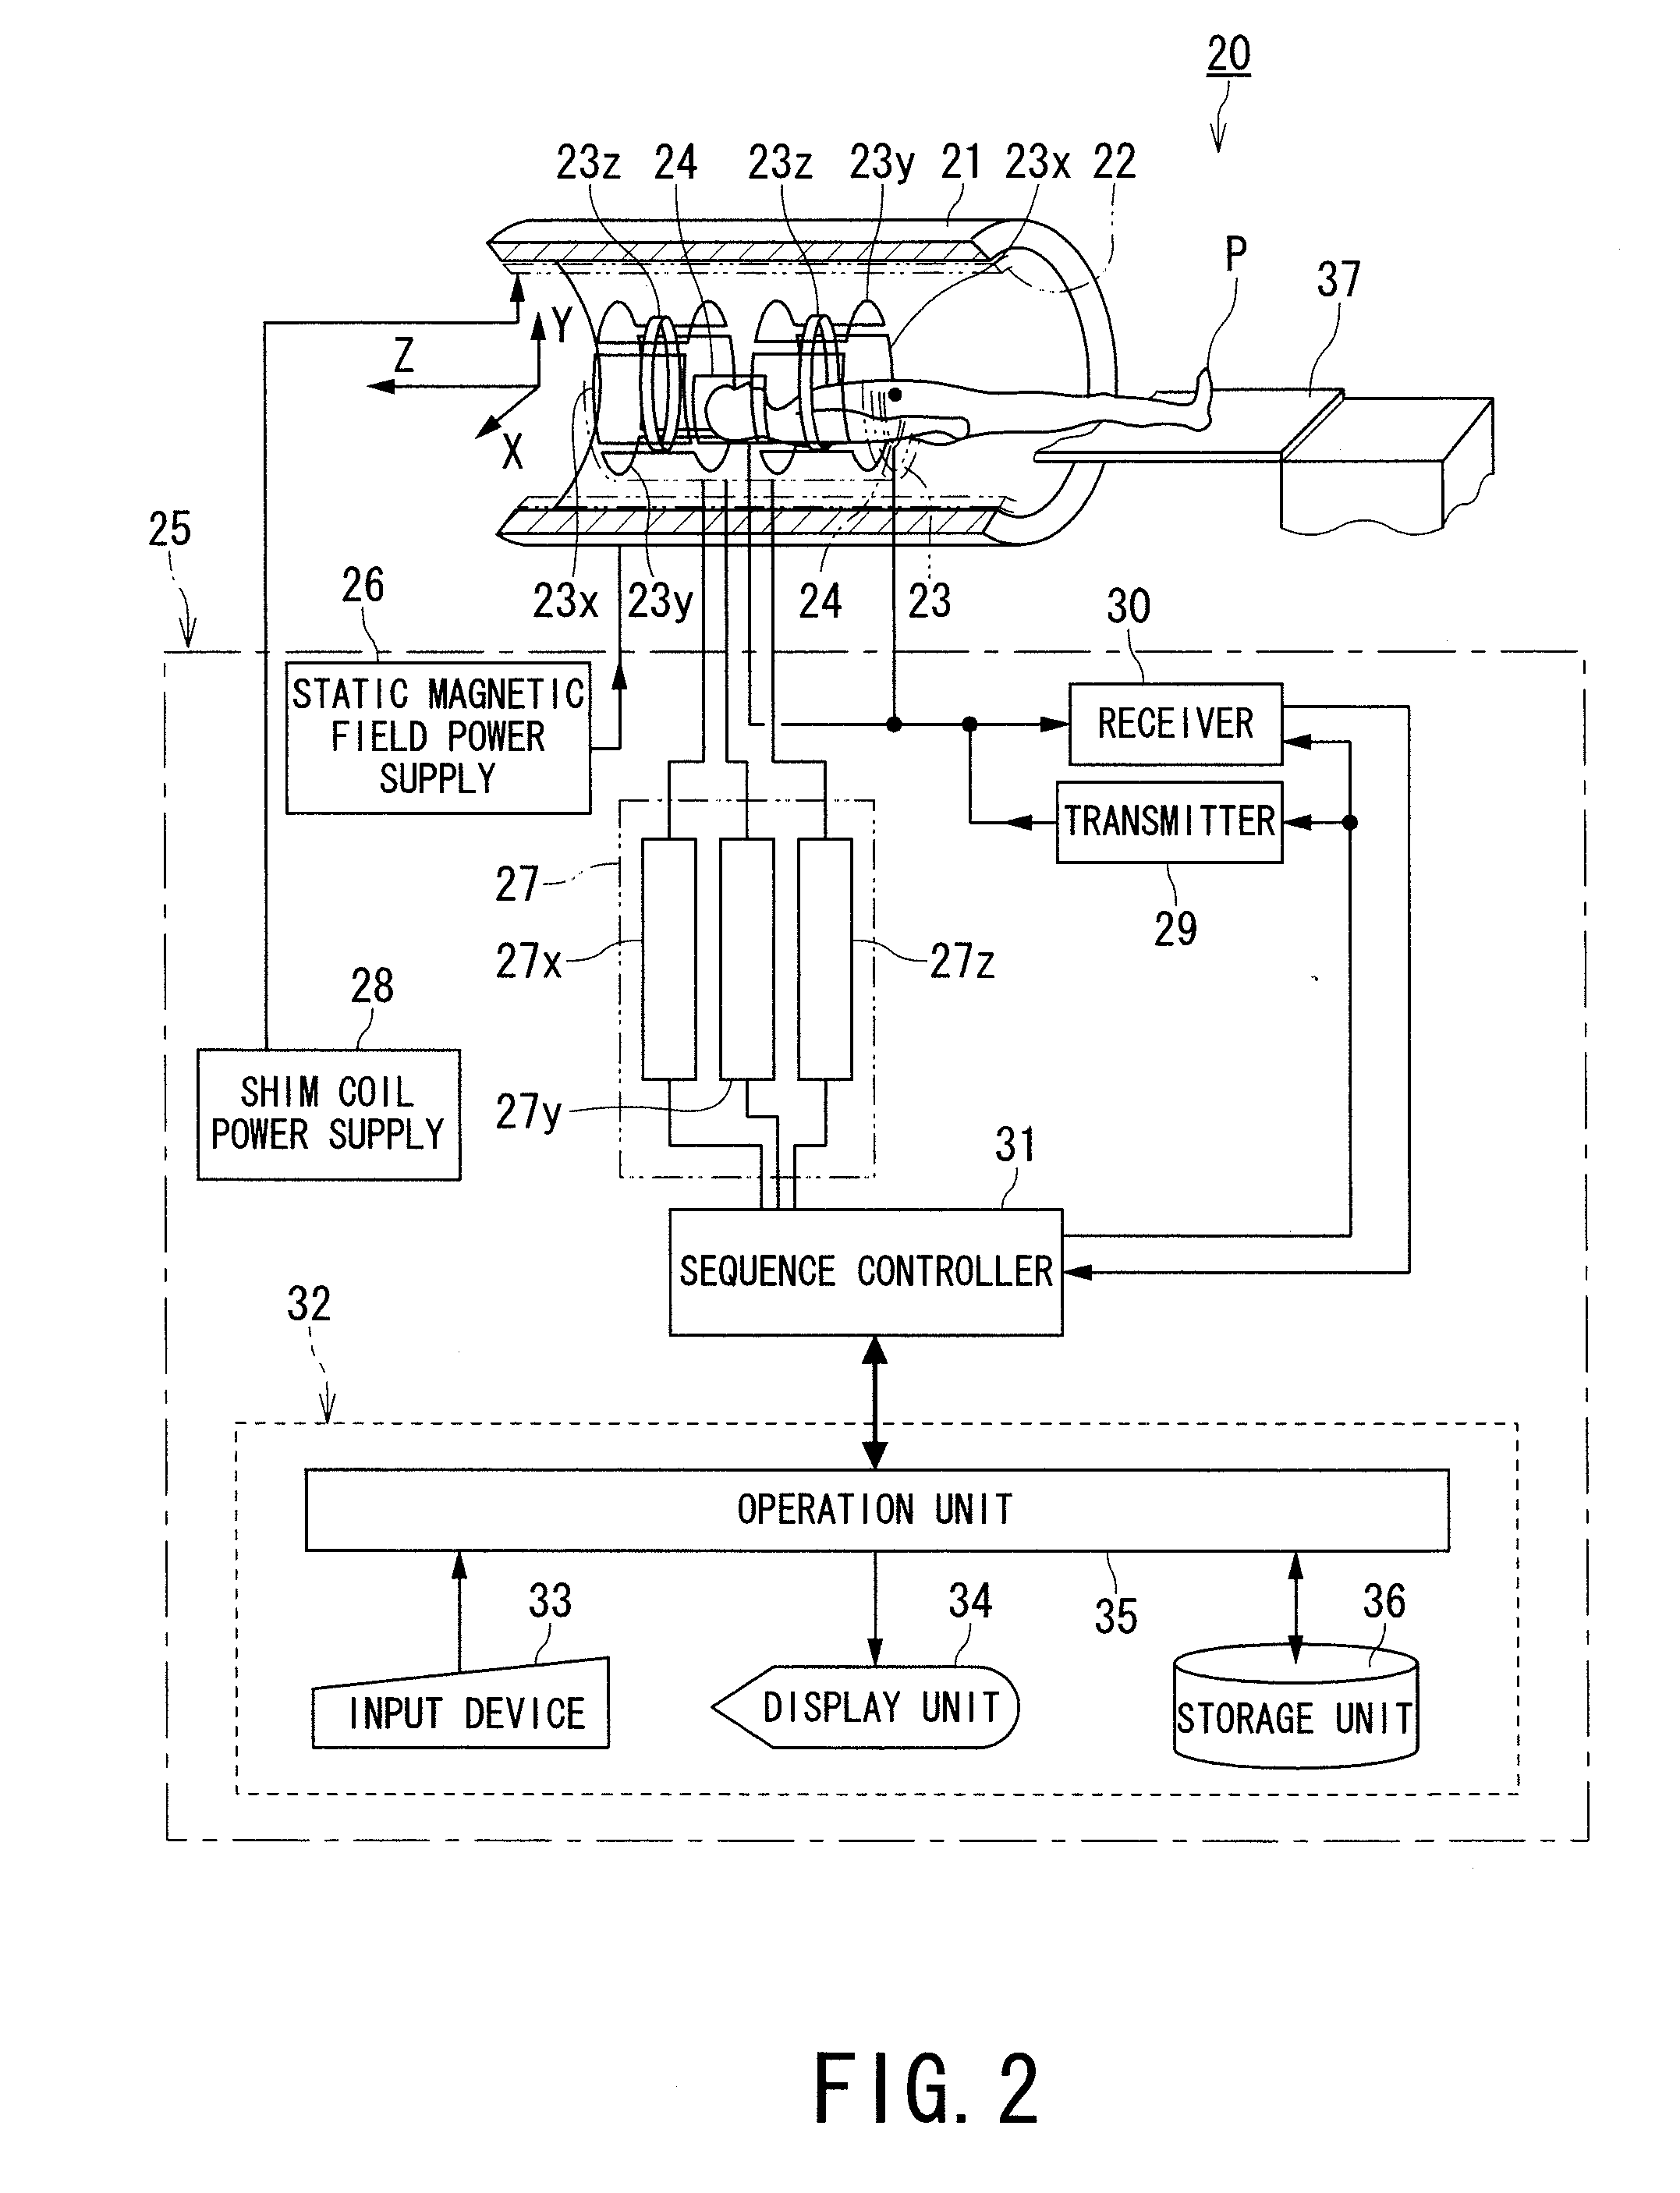 Magnetic resonance imaging apparatus and magnetic resonance imaging method